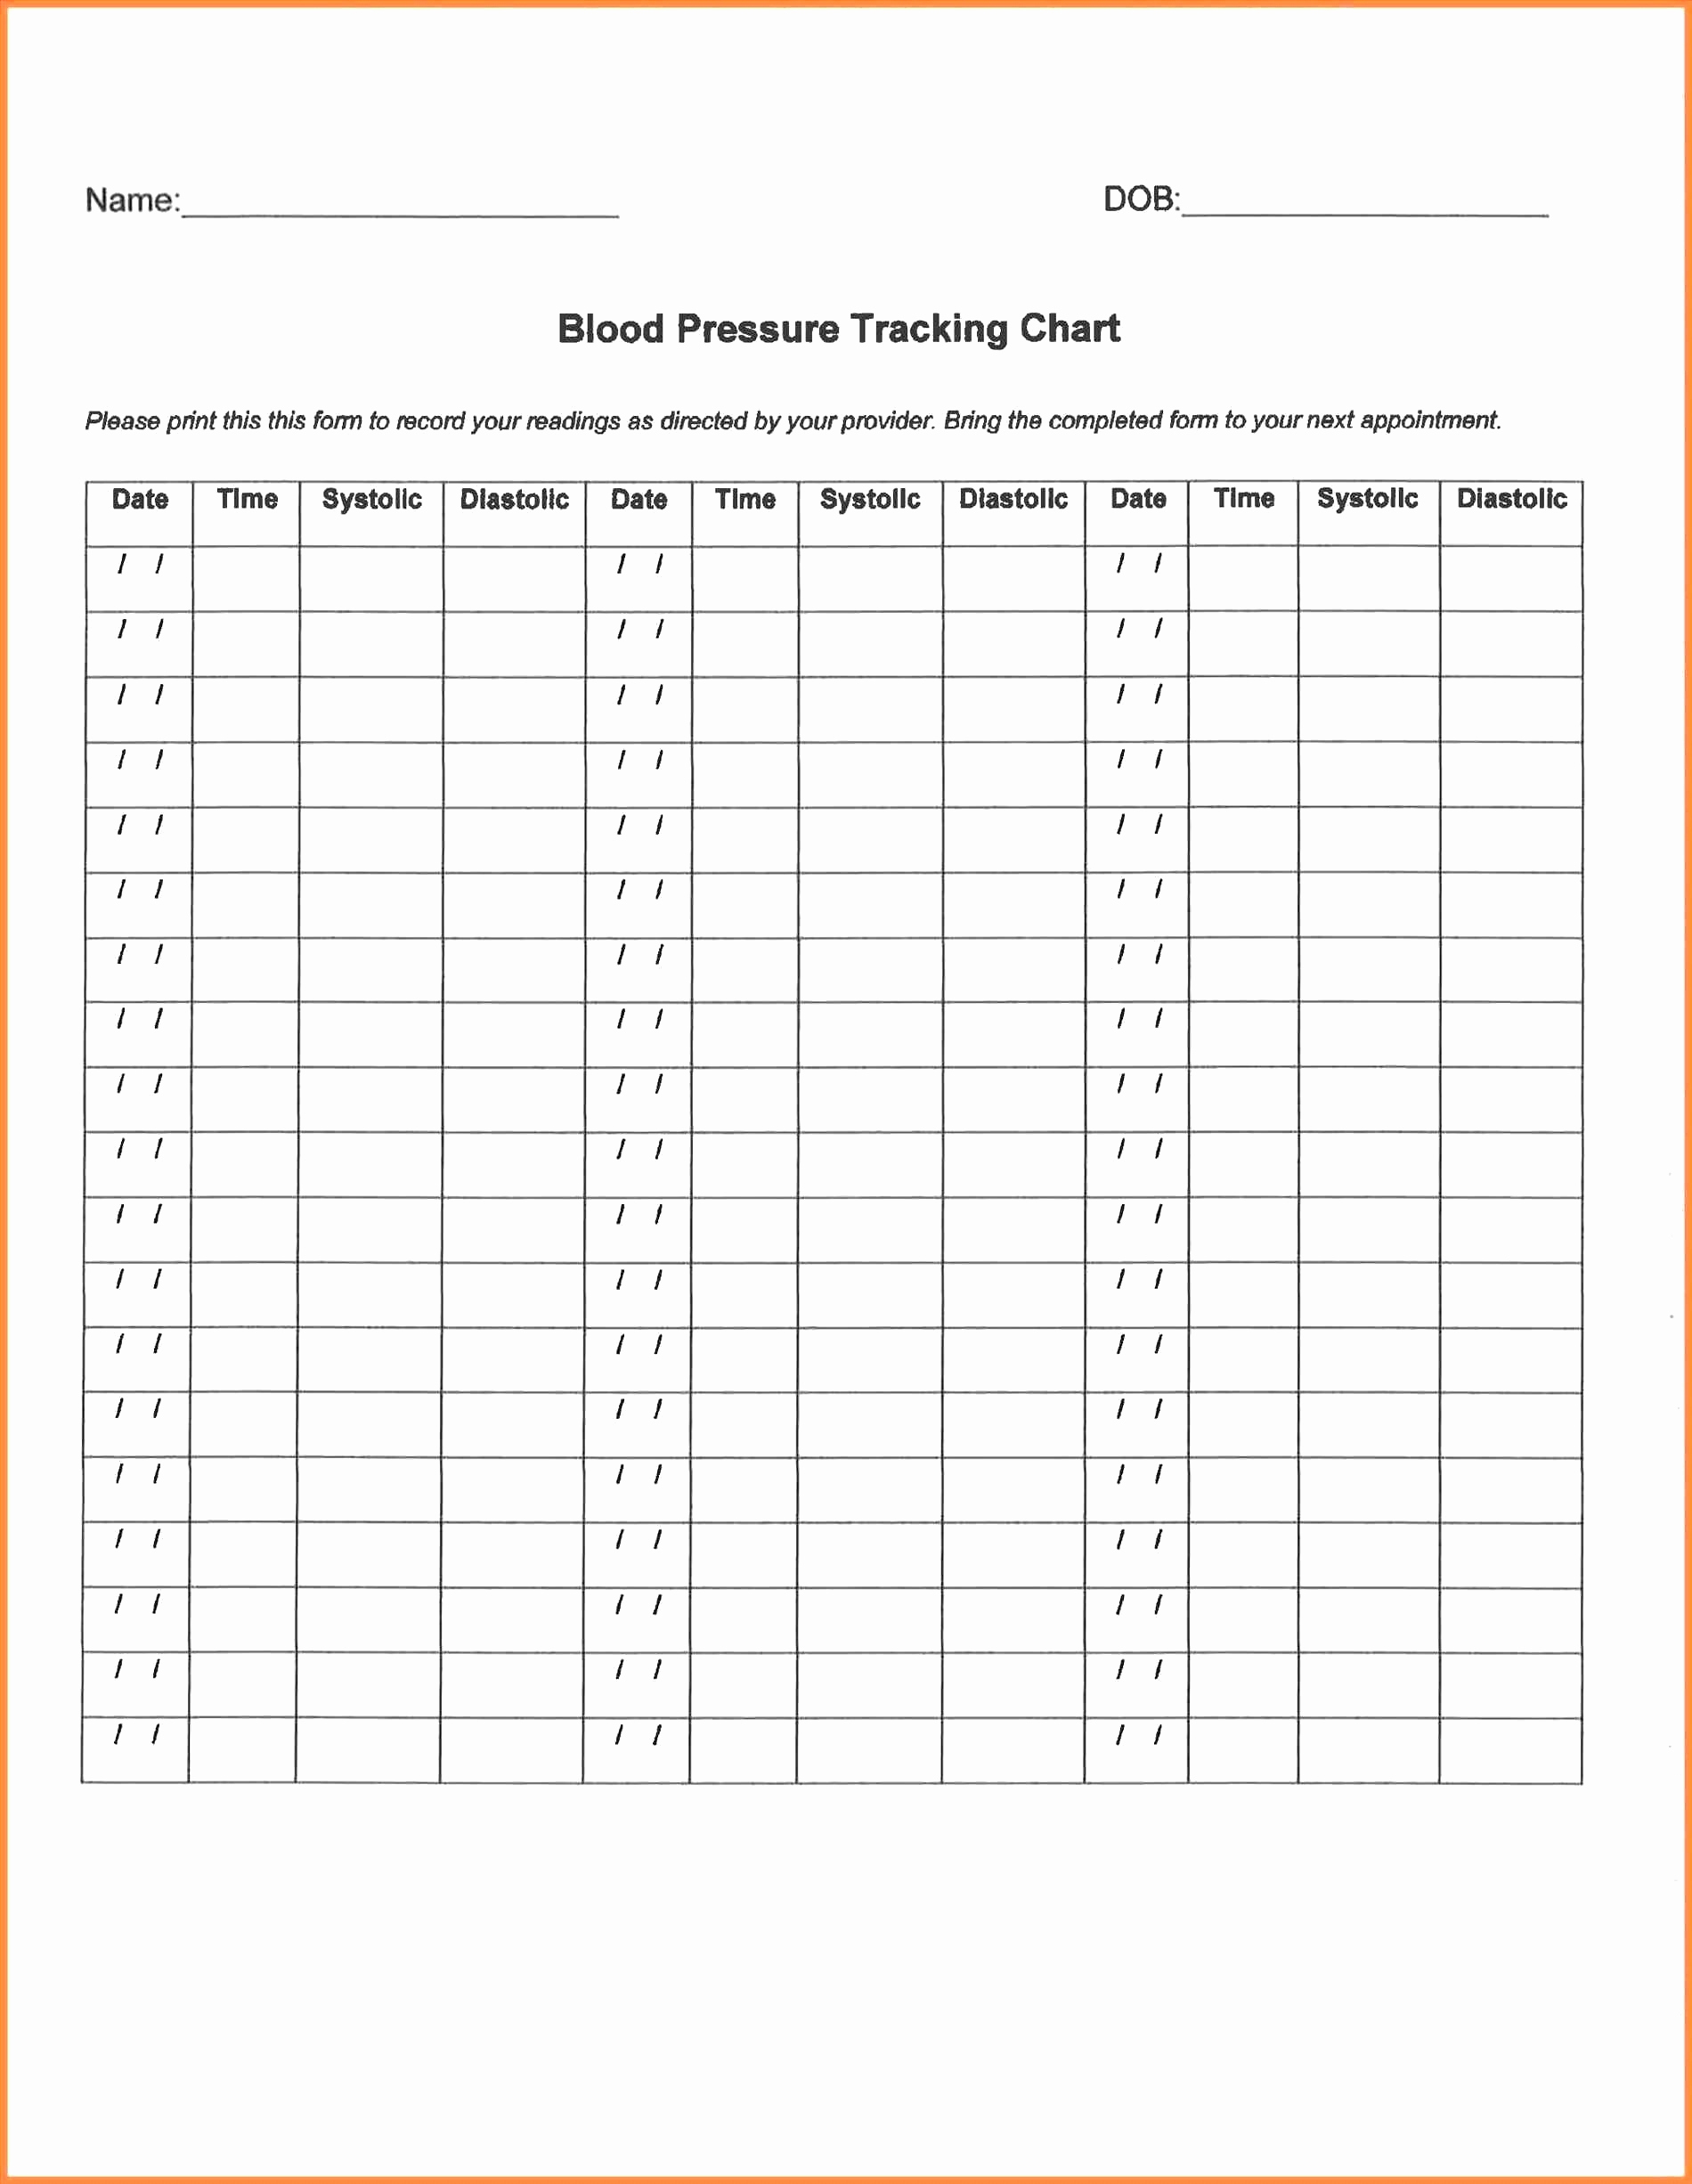 weight and sugar template tracker